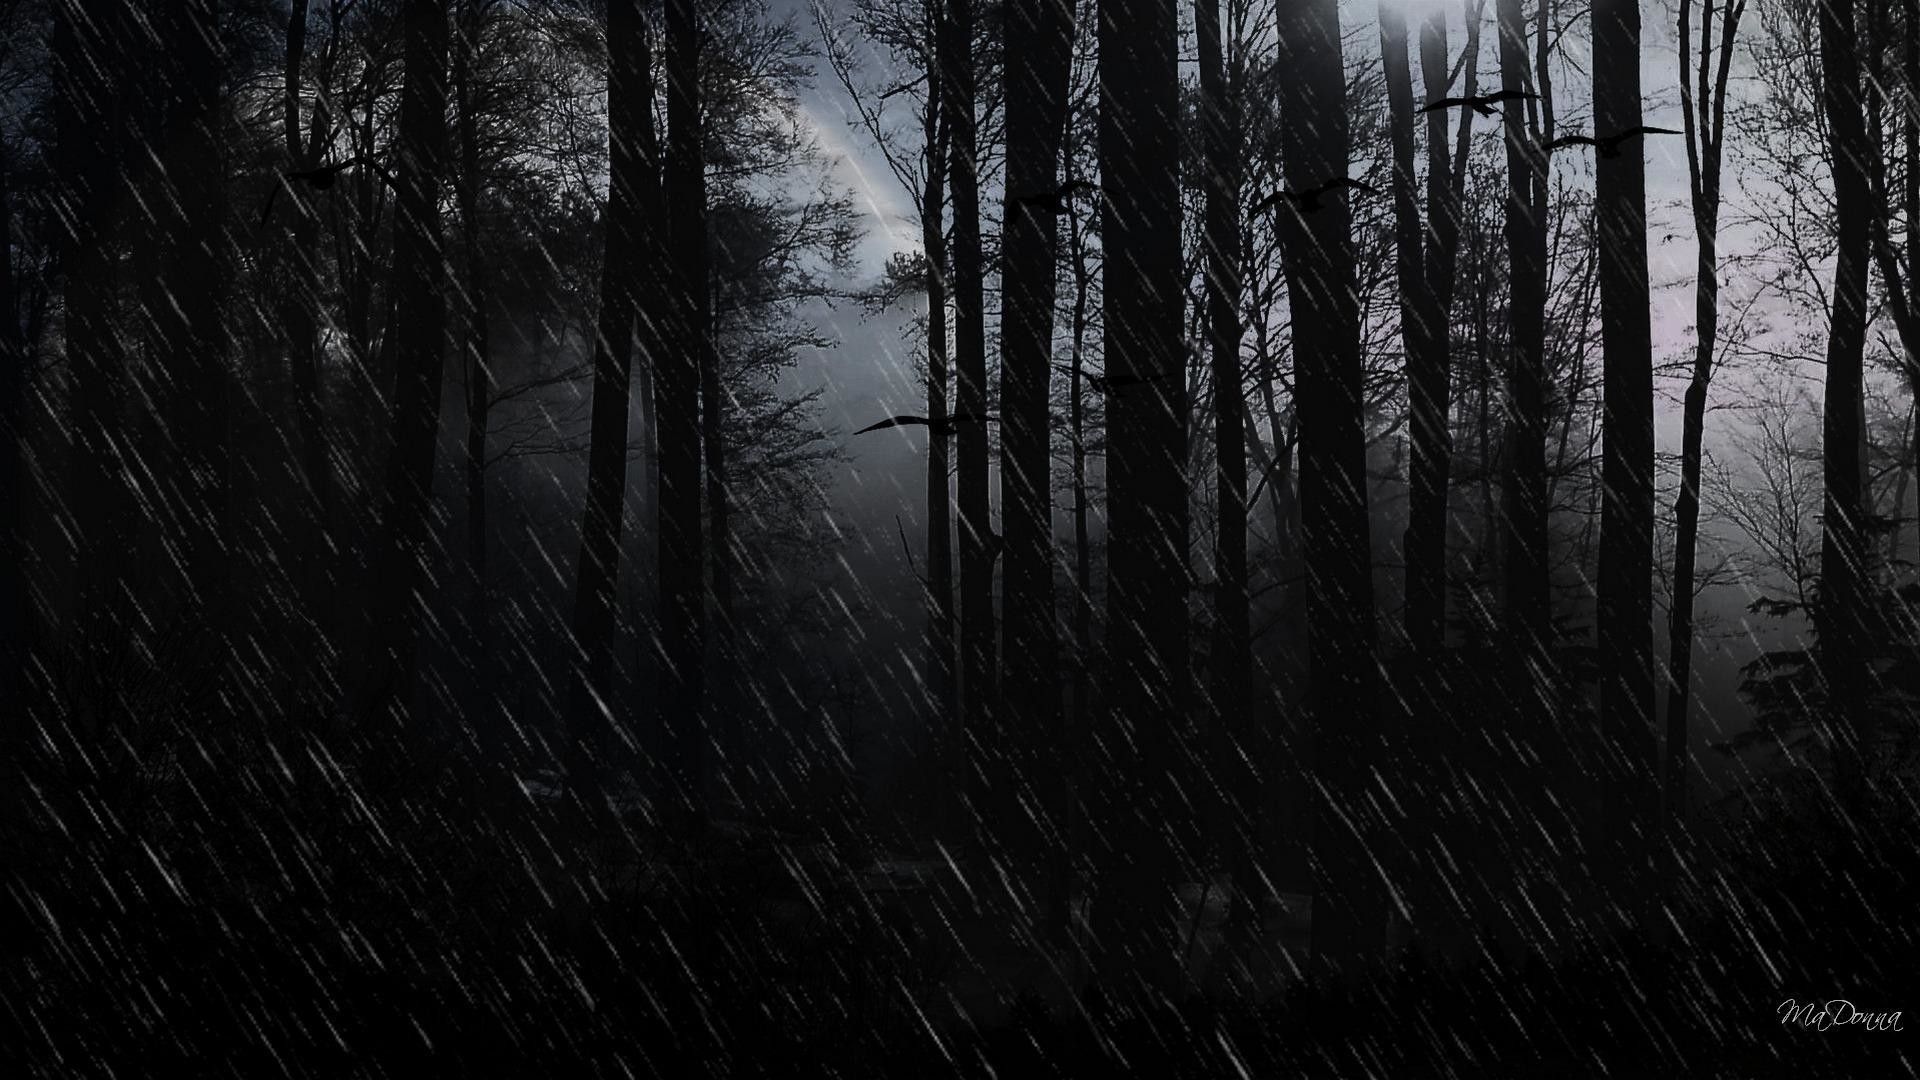 Wallpapers Dark Evil Rain Showers Forest Trees 1920x1080PX .